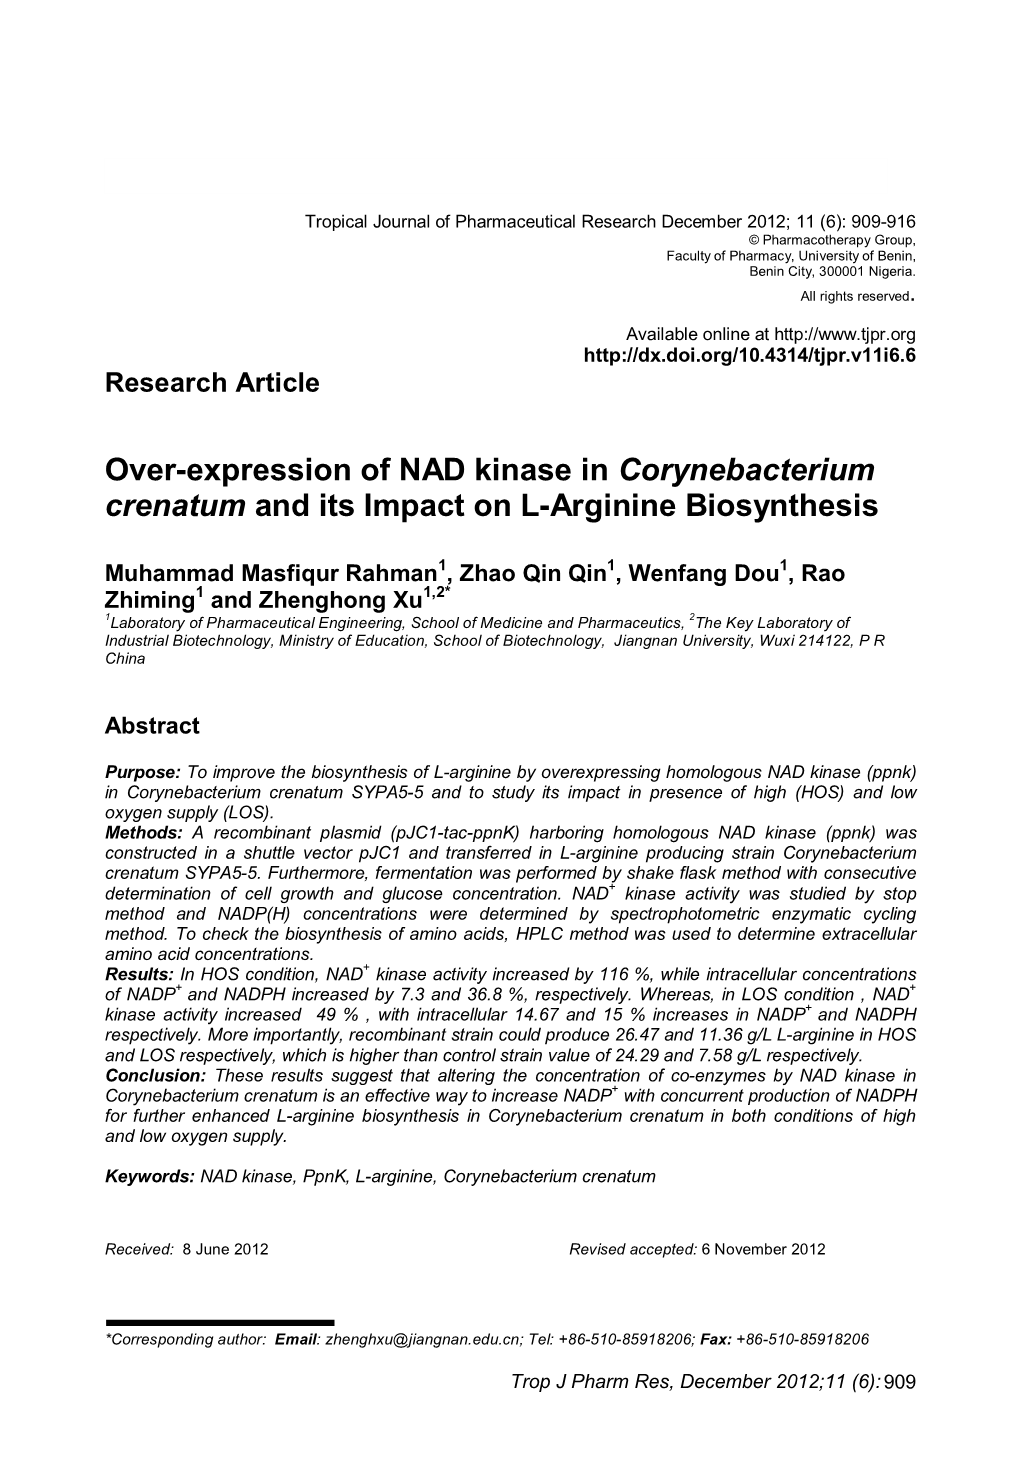 Over-Expression of NAD Kinase in Corynebacterium Crenatum and Its Impact on L-Arginine Biosynthesis